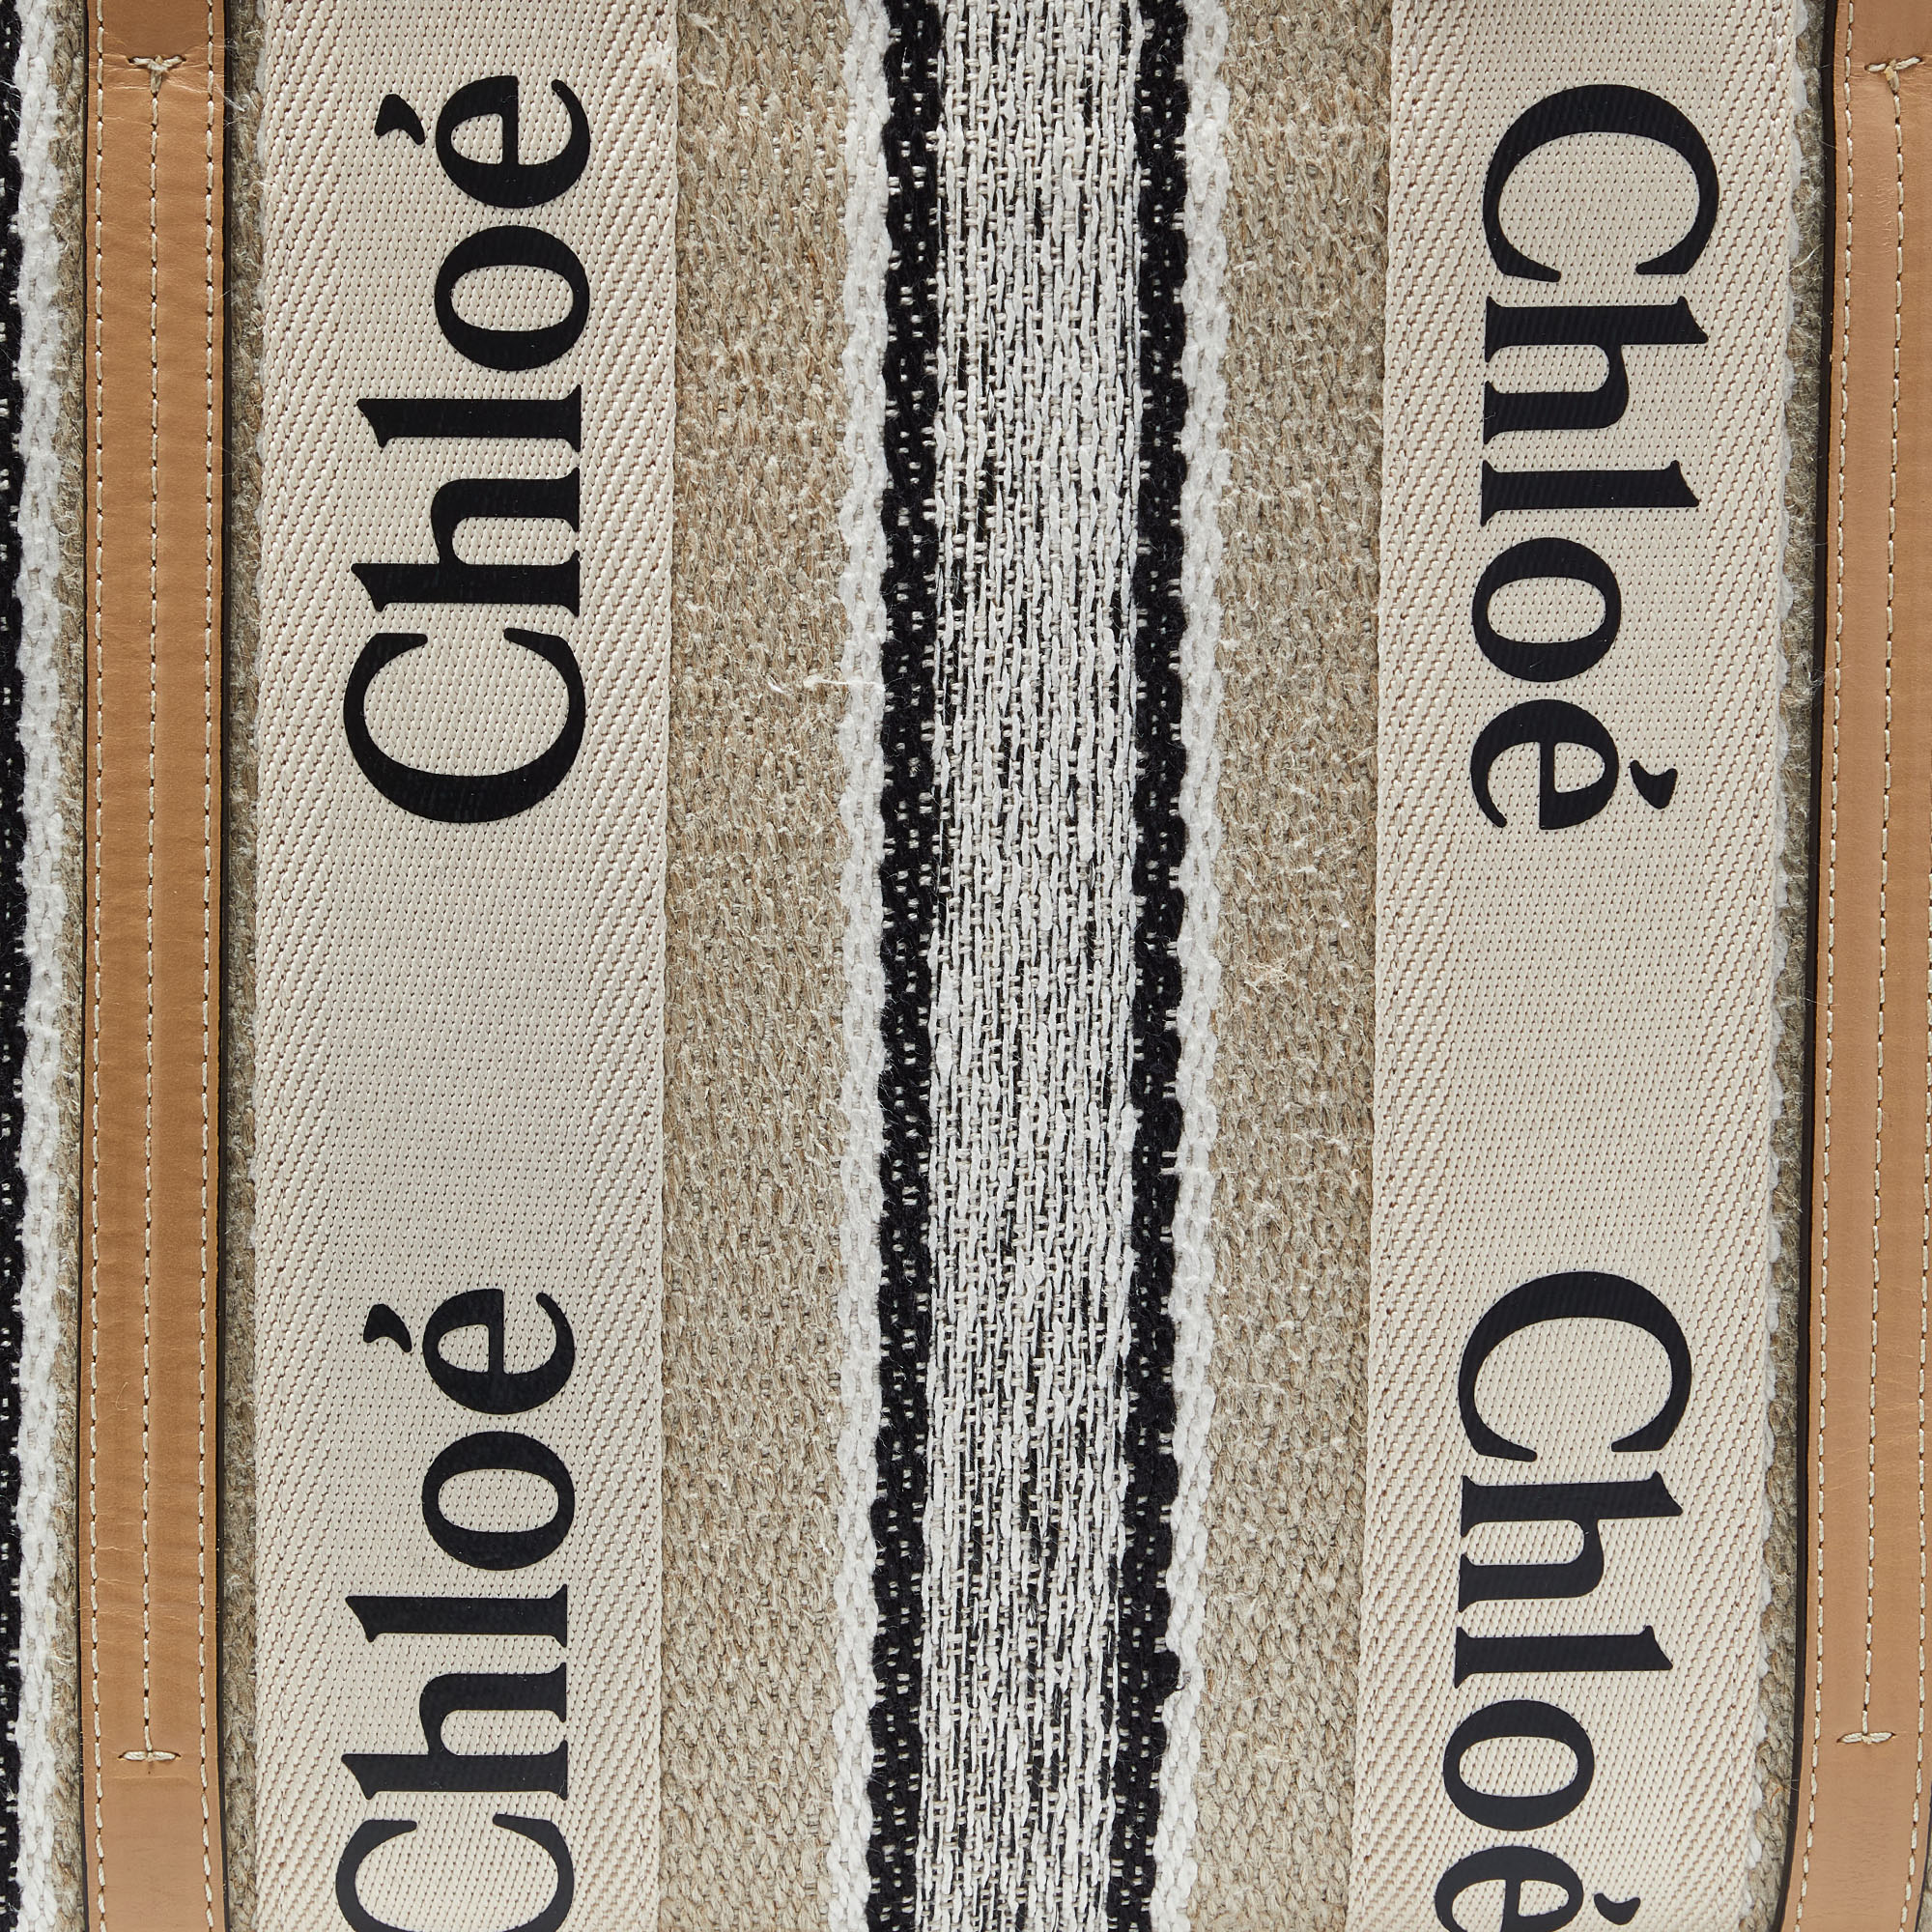 Chloe Multicolor Linen And Leather Medium Woody Tote